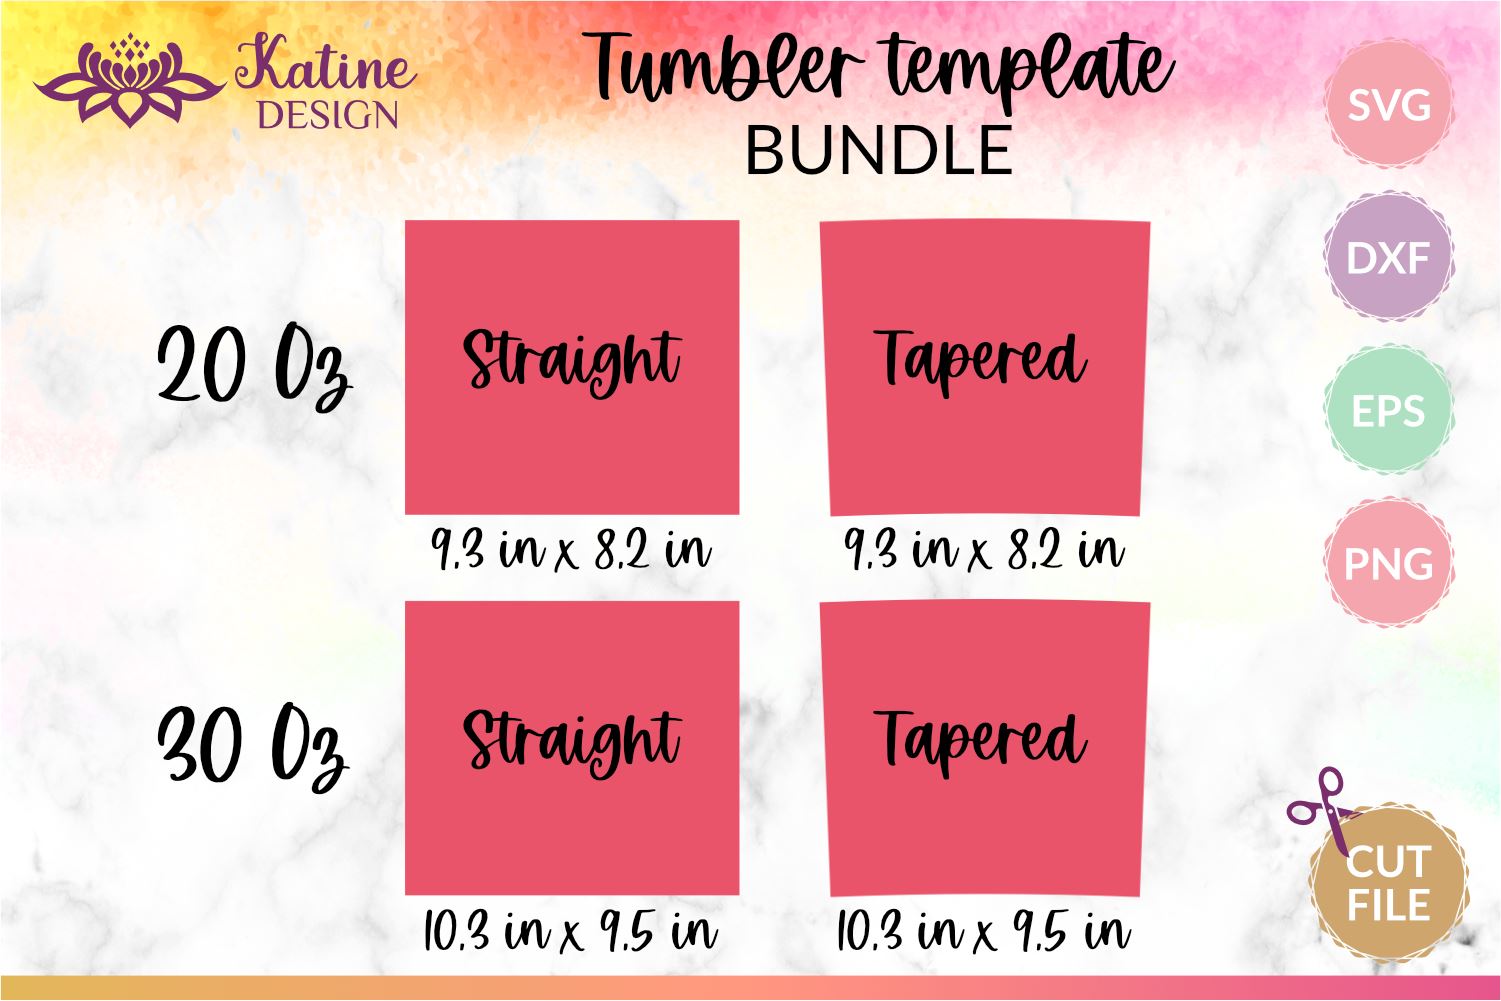 How to Sublimate Tapered Tumblers & Make a Wrap Template